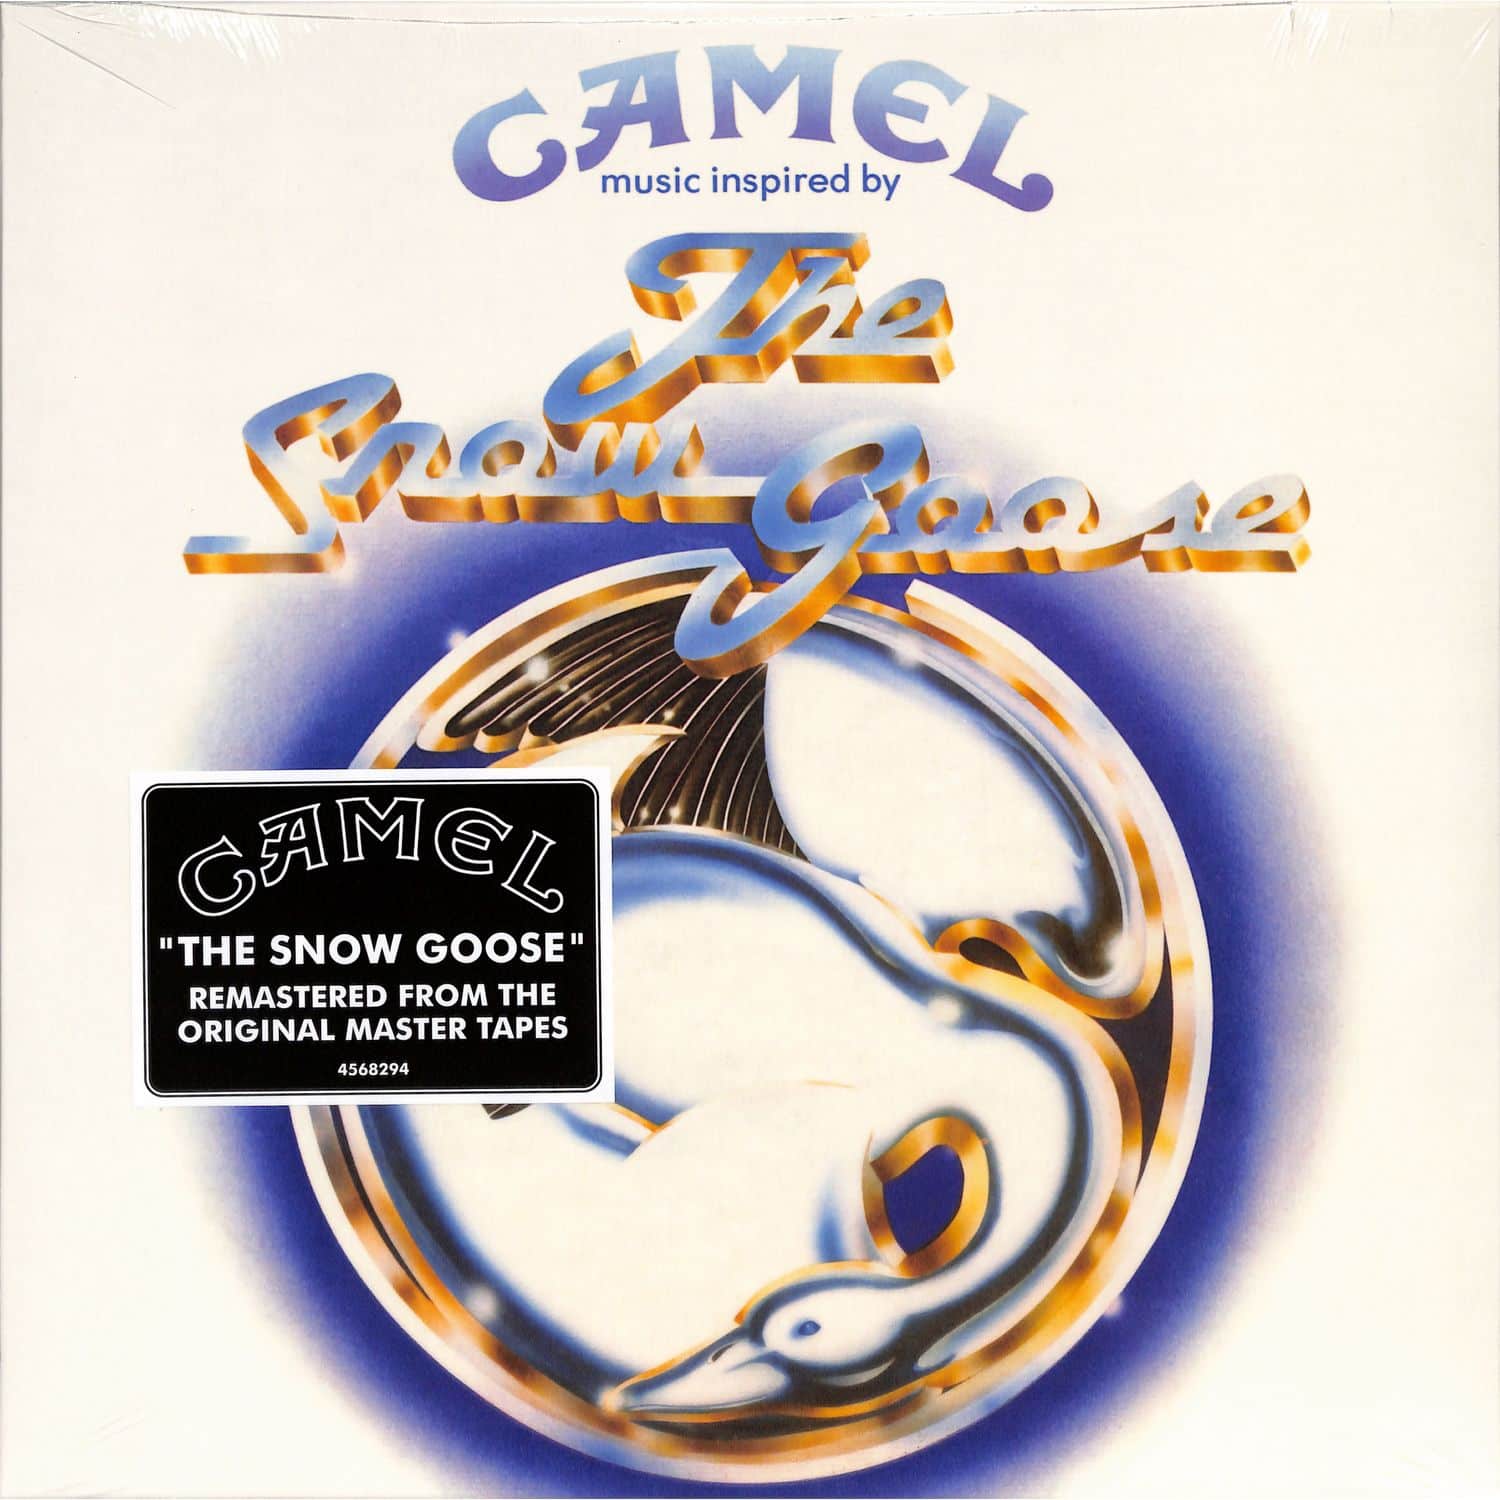 Camel - MUSIC INSPIRED BY THE SNOW GOOSE 